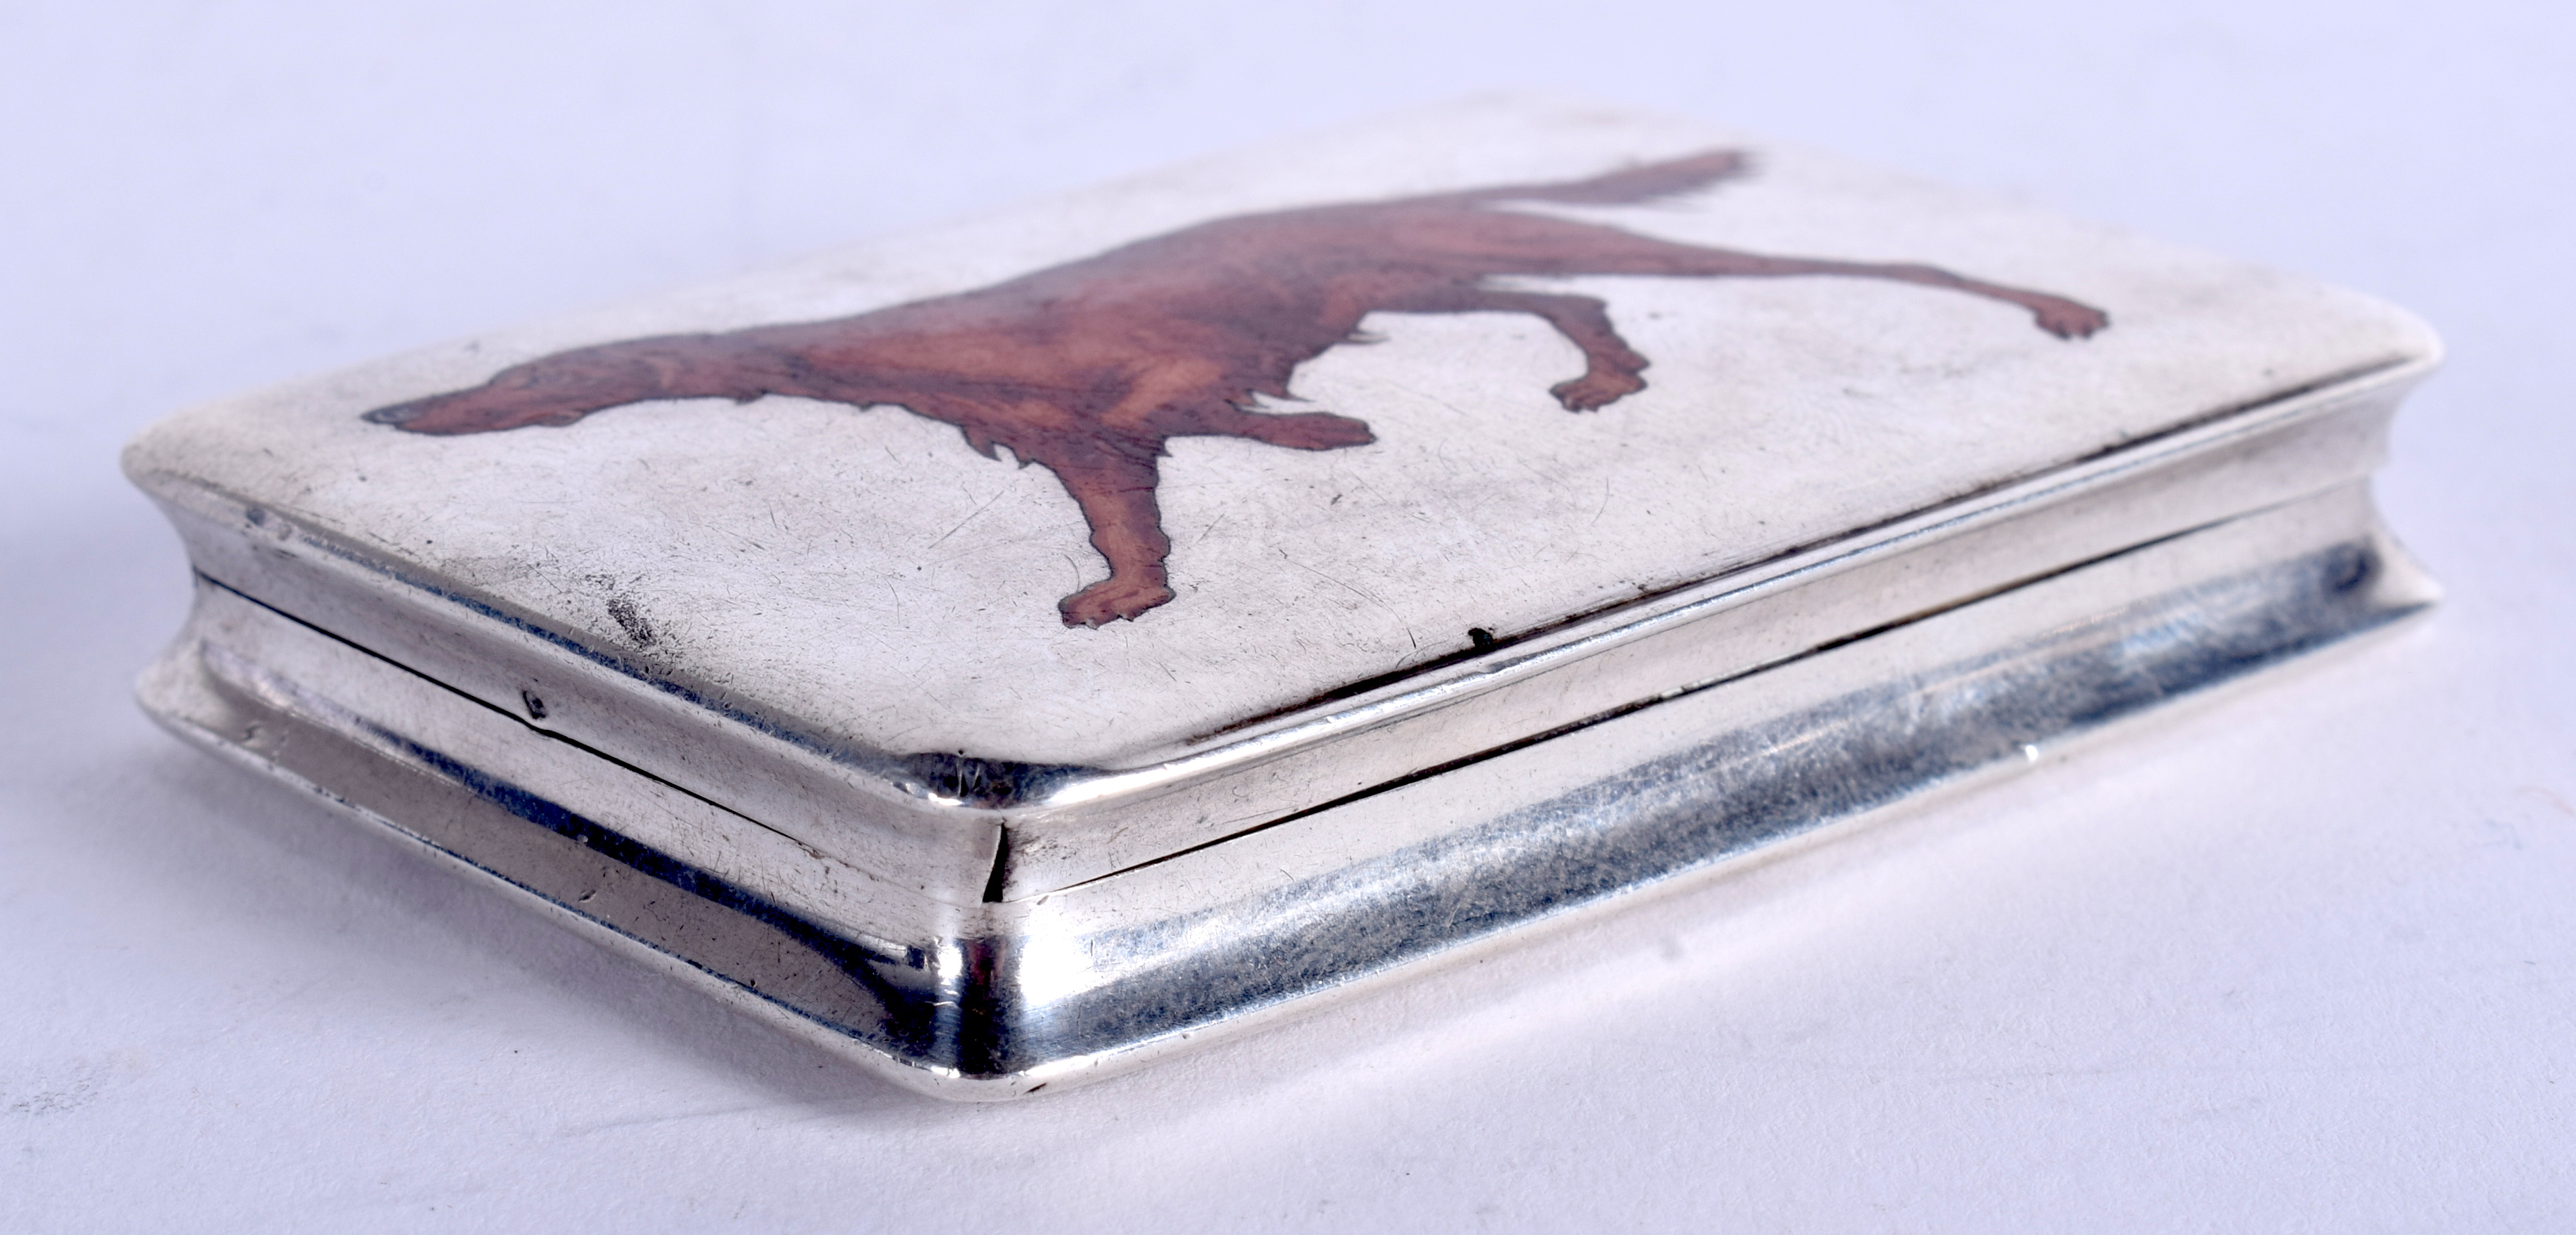 AN ART DECO CONTINENTAL SILVER AND ENAMEL SNUFF BOX painted with a dog. 2.4 oz. 7.5 cm x 5.5 cm. - Image 3 of 5